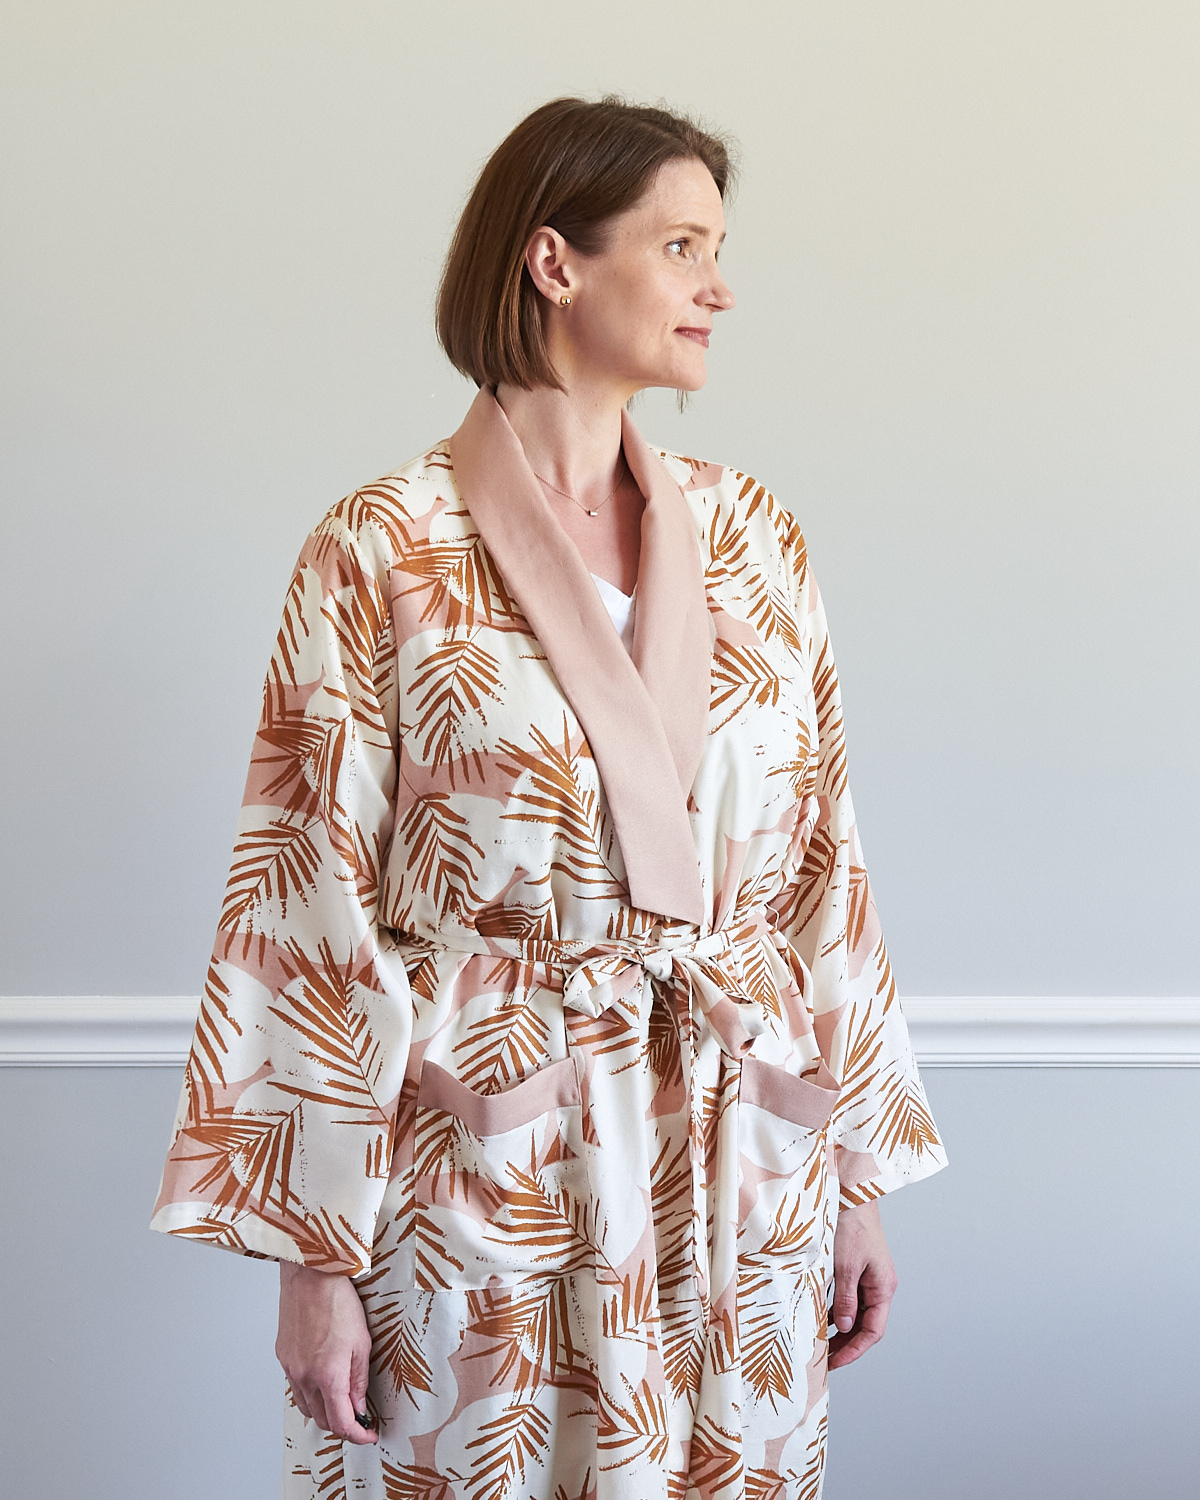 How to Sew With Rayon: A Guide, Blog